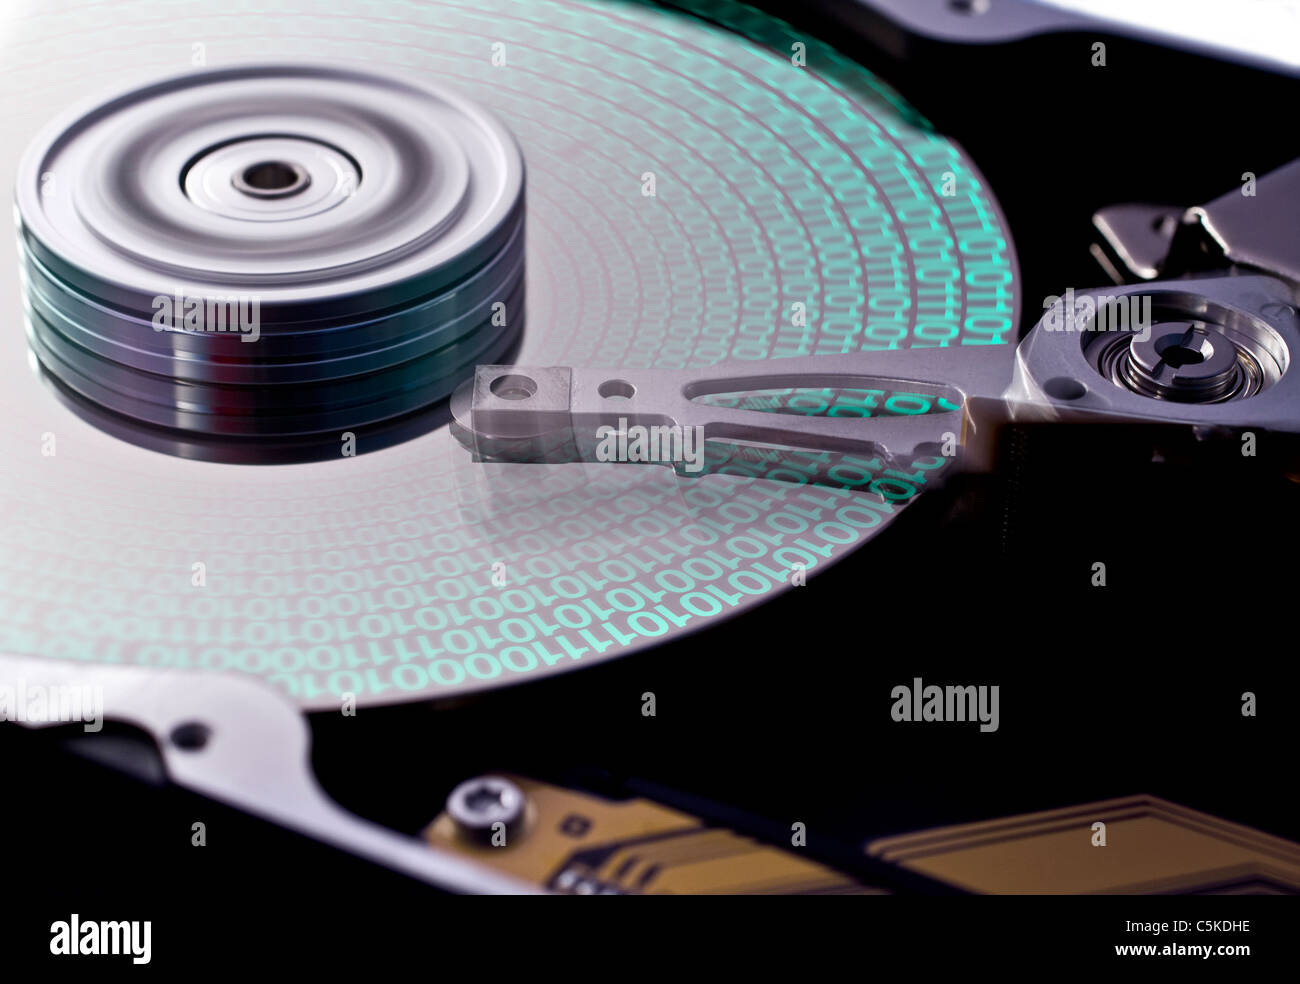 hard disk drive in close up with data on disk. head in motion Stock Photo